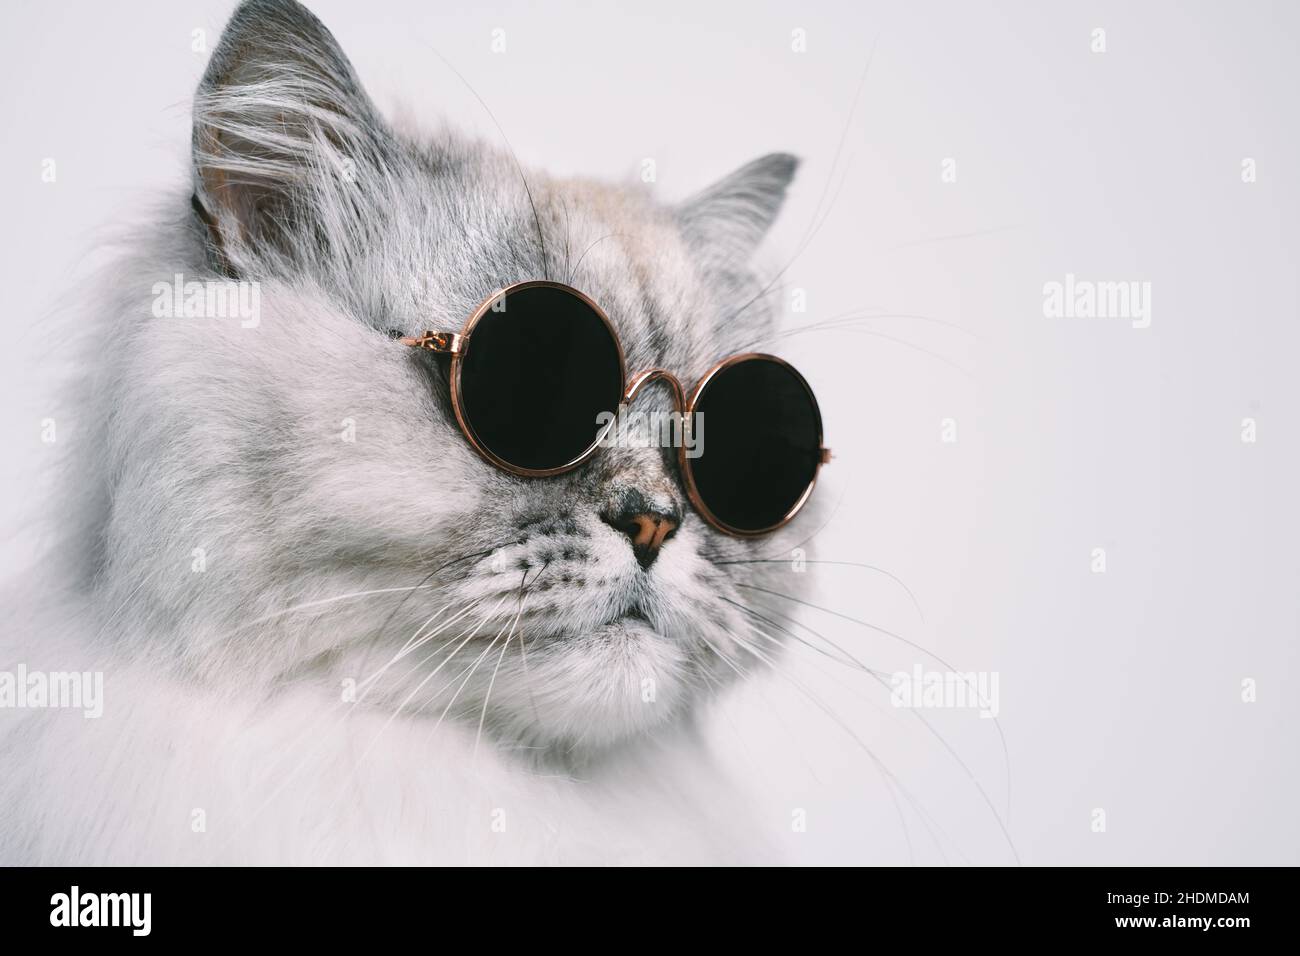 Space cat in sunglasses - cool cat meme with copy space